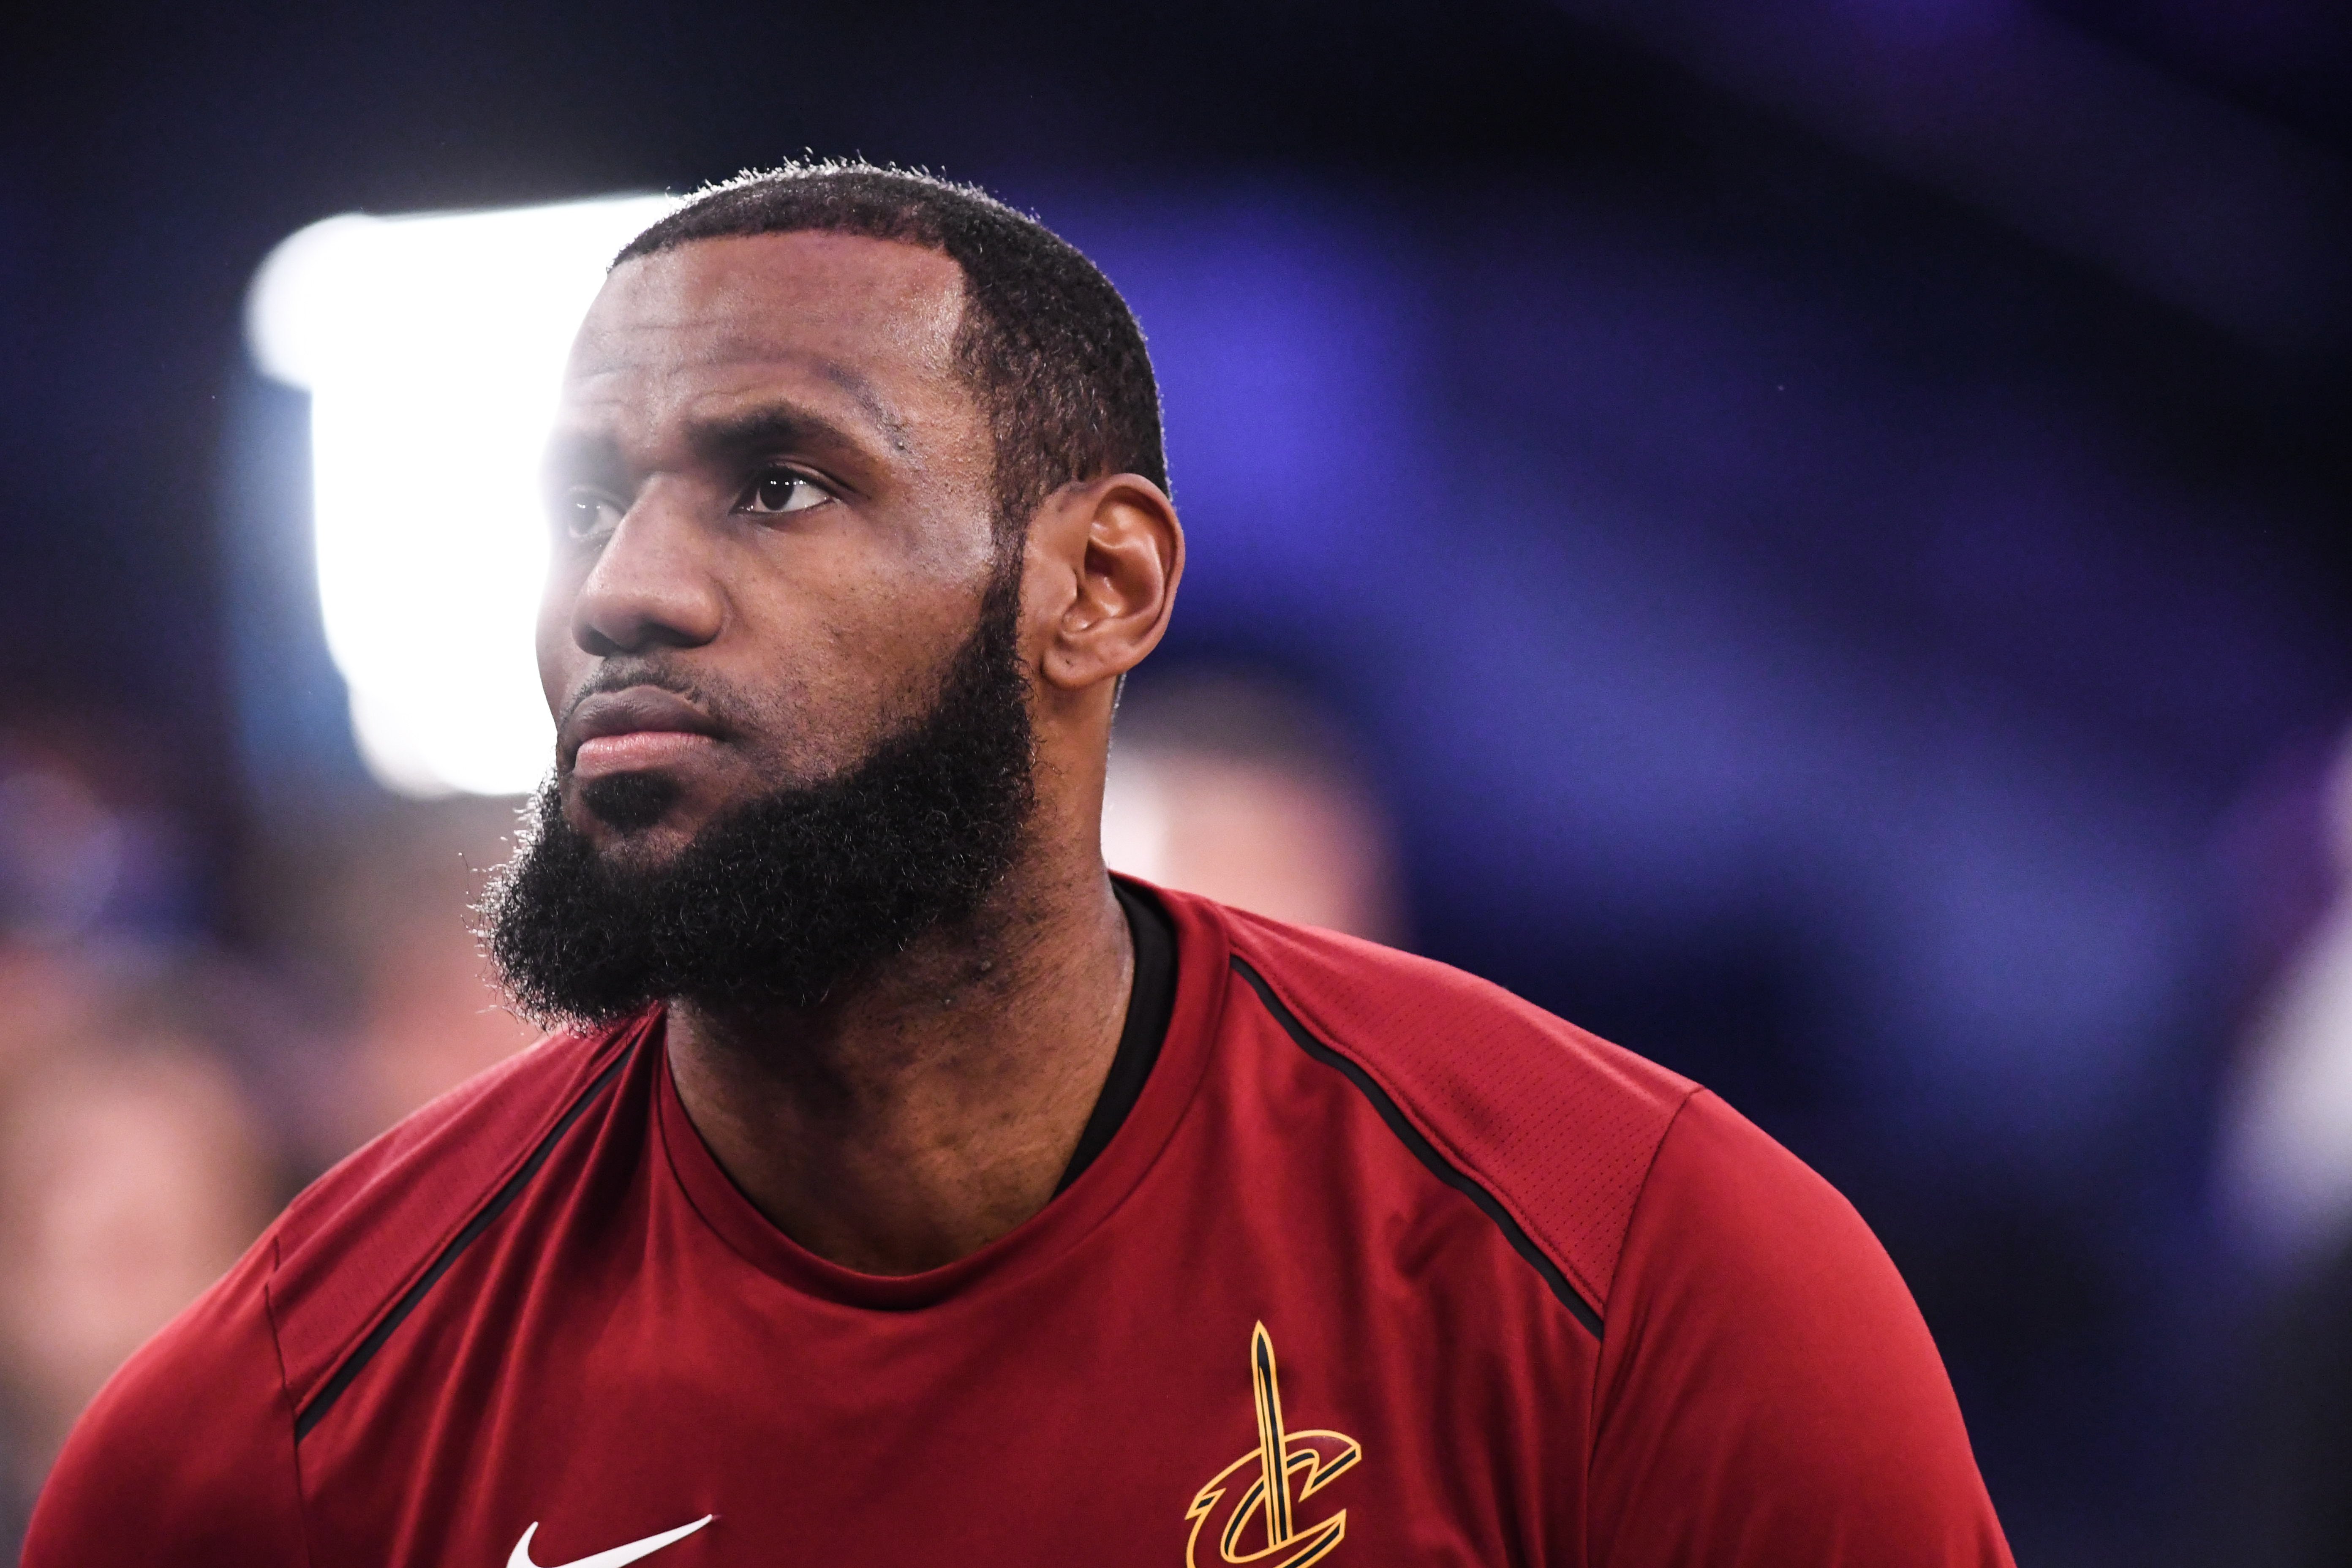 LeBron James pictured before a Cleveland Cavaliers game against the New York Knicks on April 9, 2018 in New York City | Photo: Getty Images